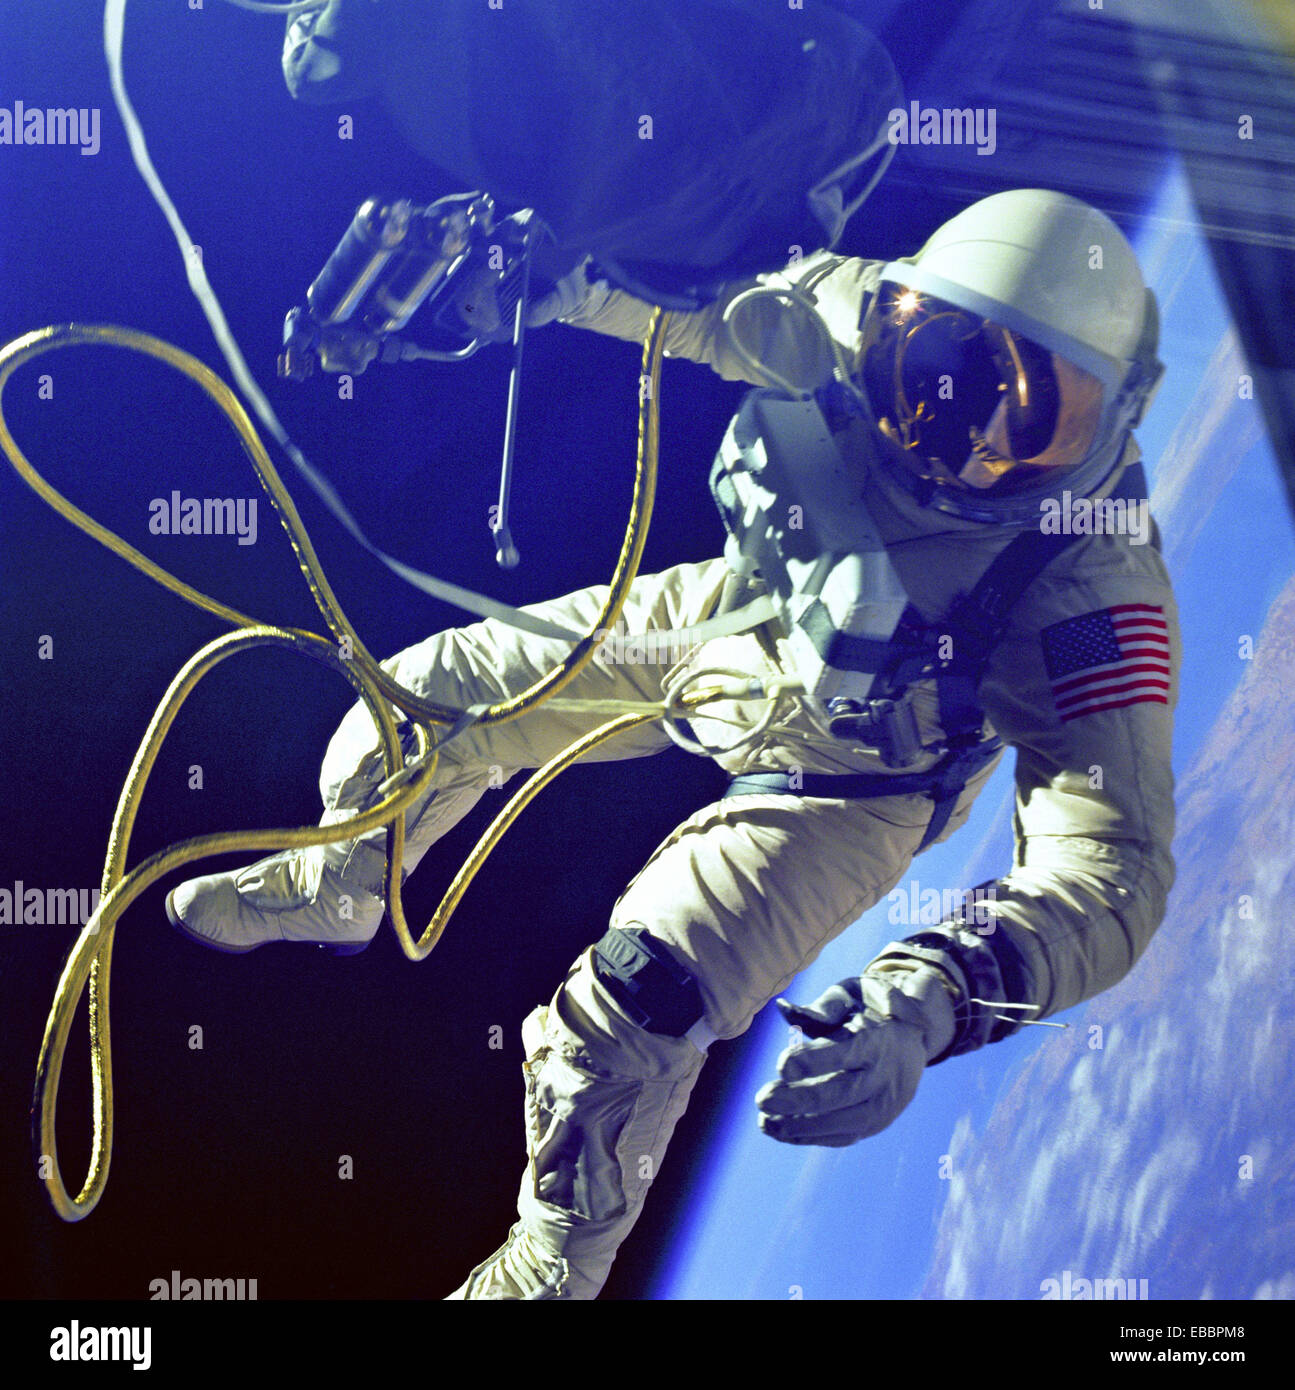 On June 3, 1965 Edward H. White II became the first American to step outside his spacecraft and let go, effectively setting Stock Photo